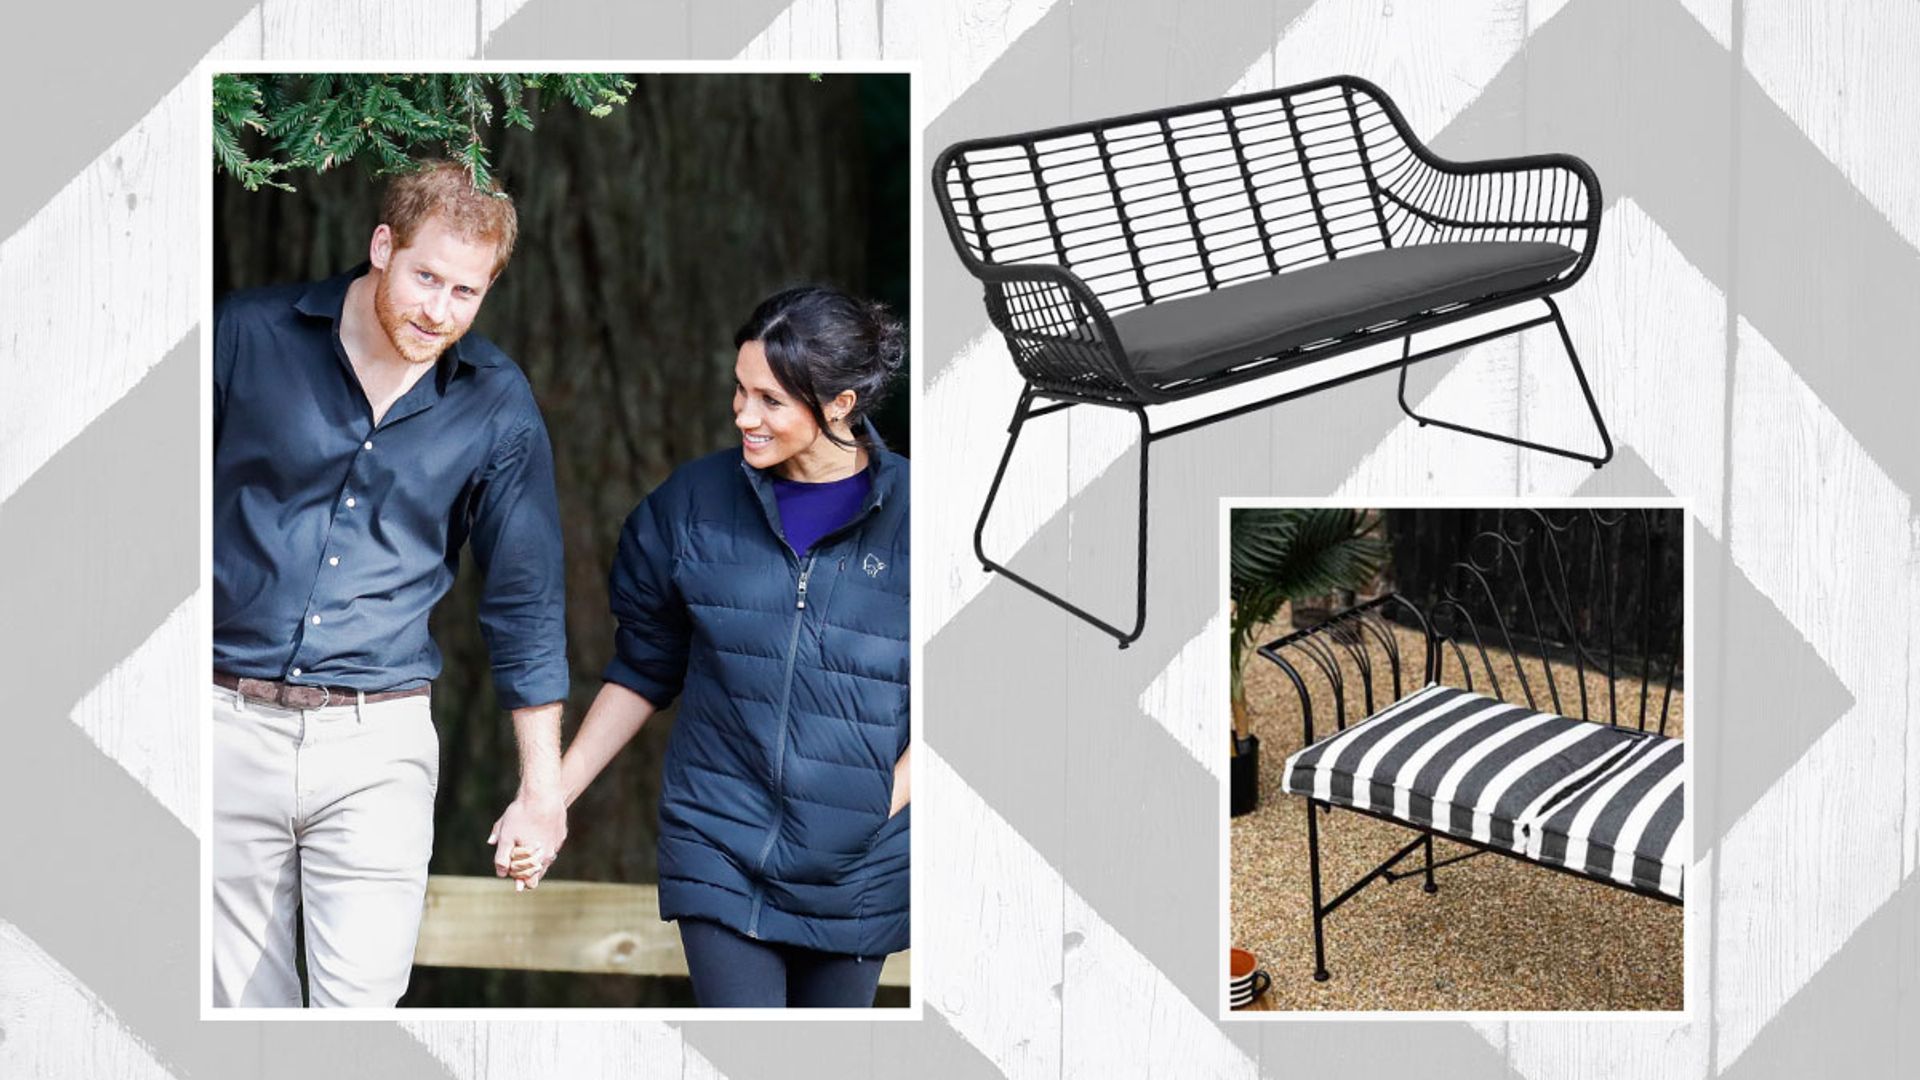 Prince Harry and Meghan Markle debut stylish garden furniture – shop the look